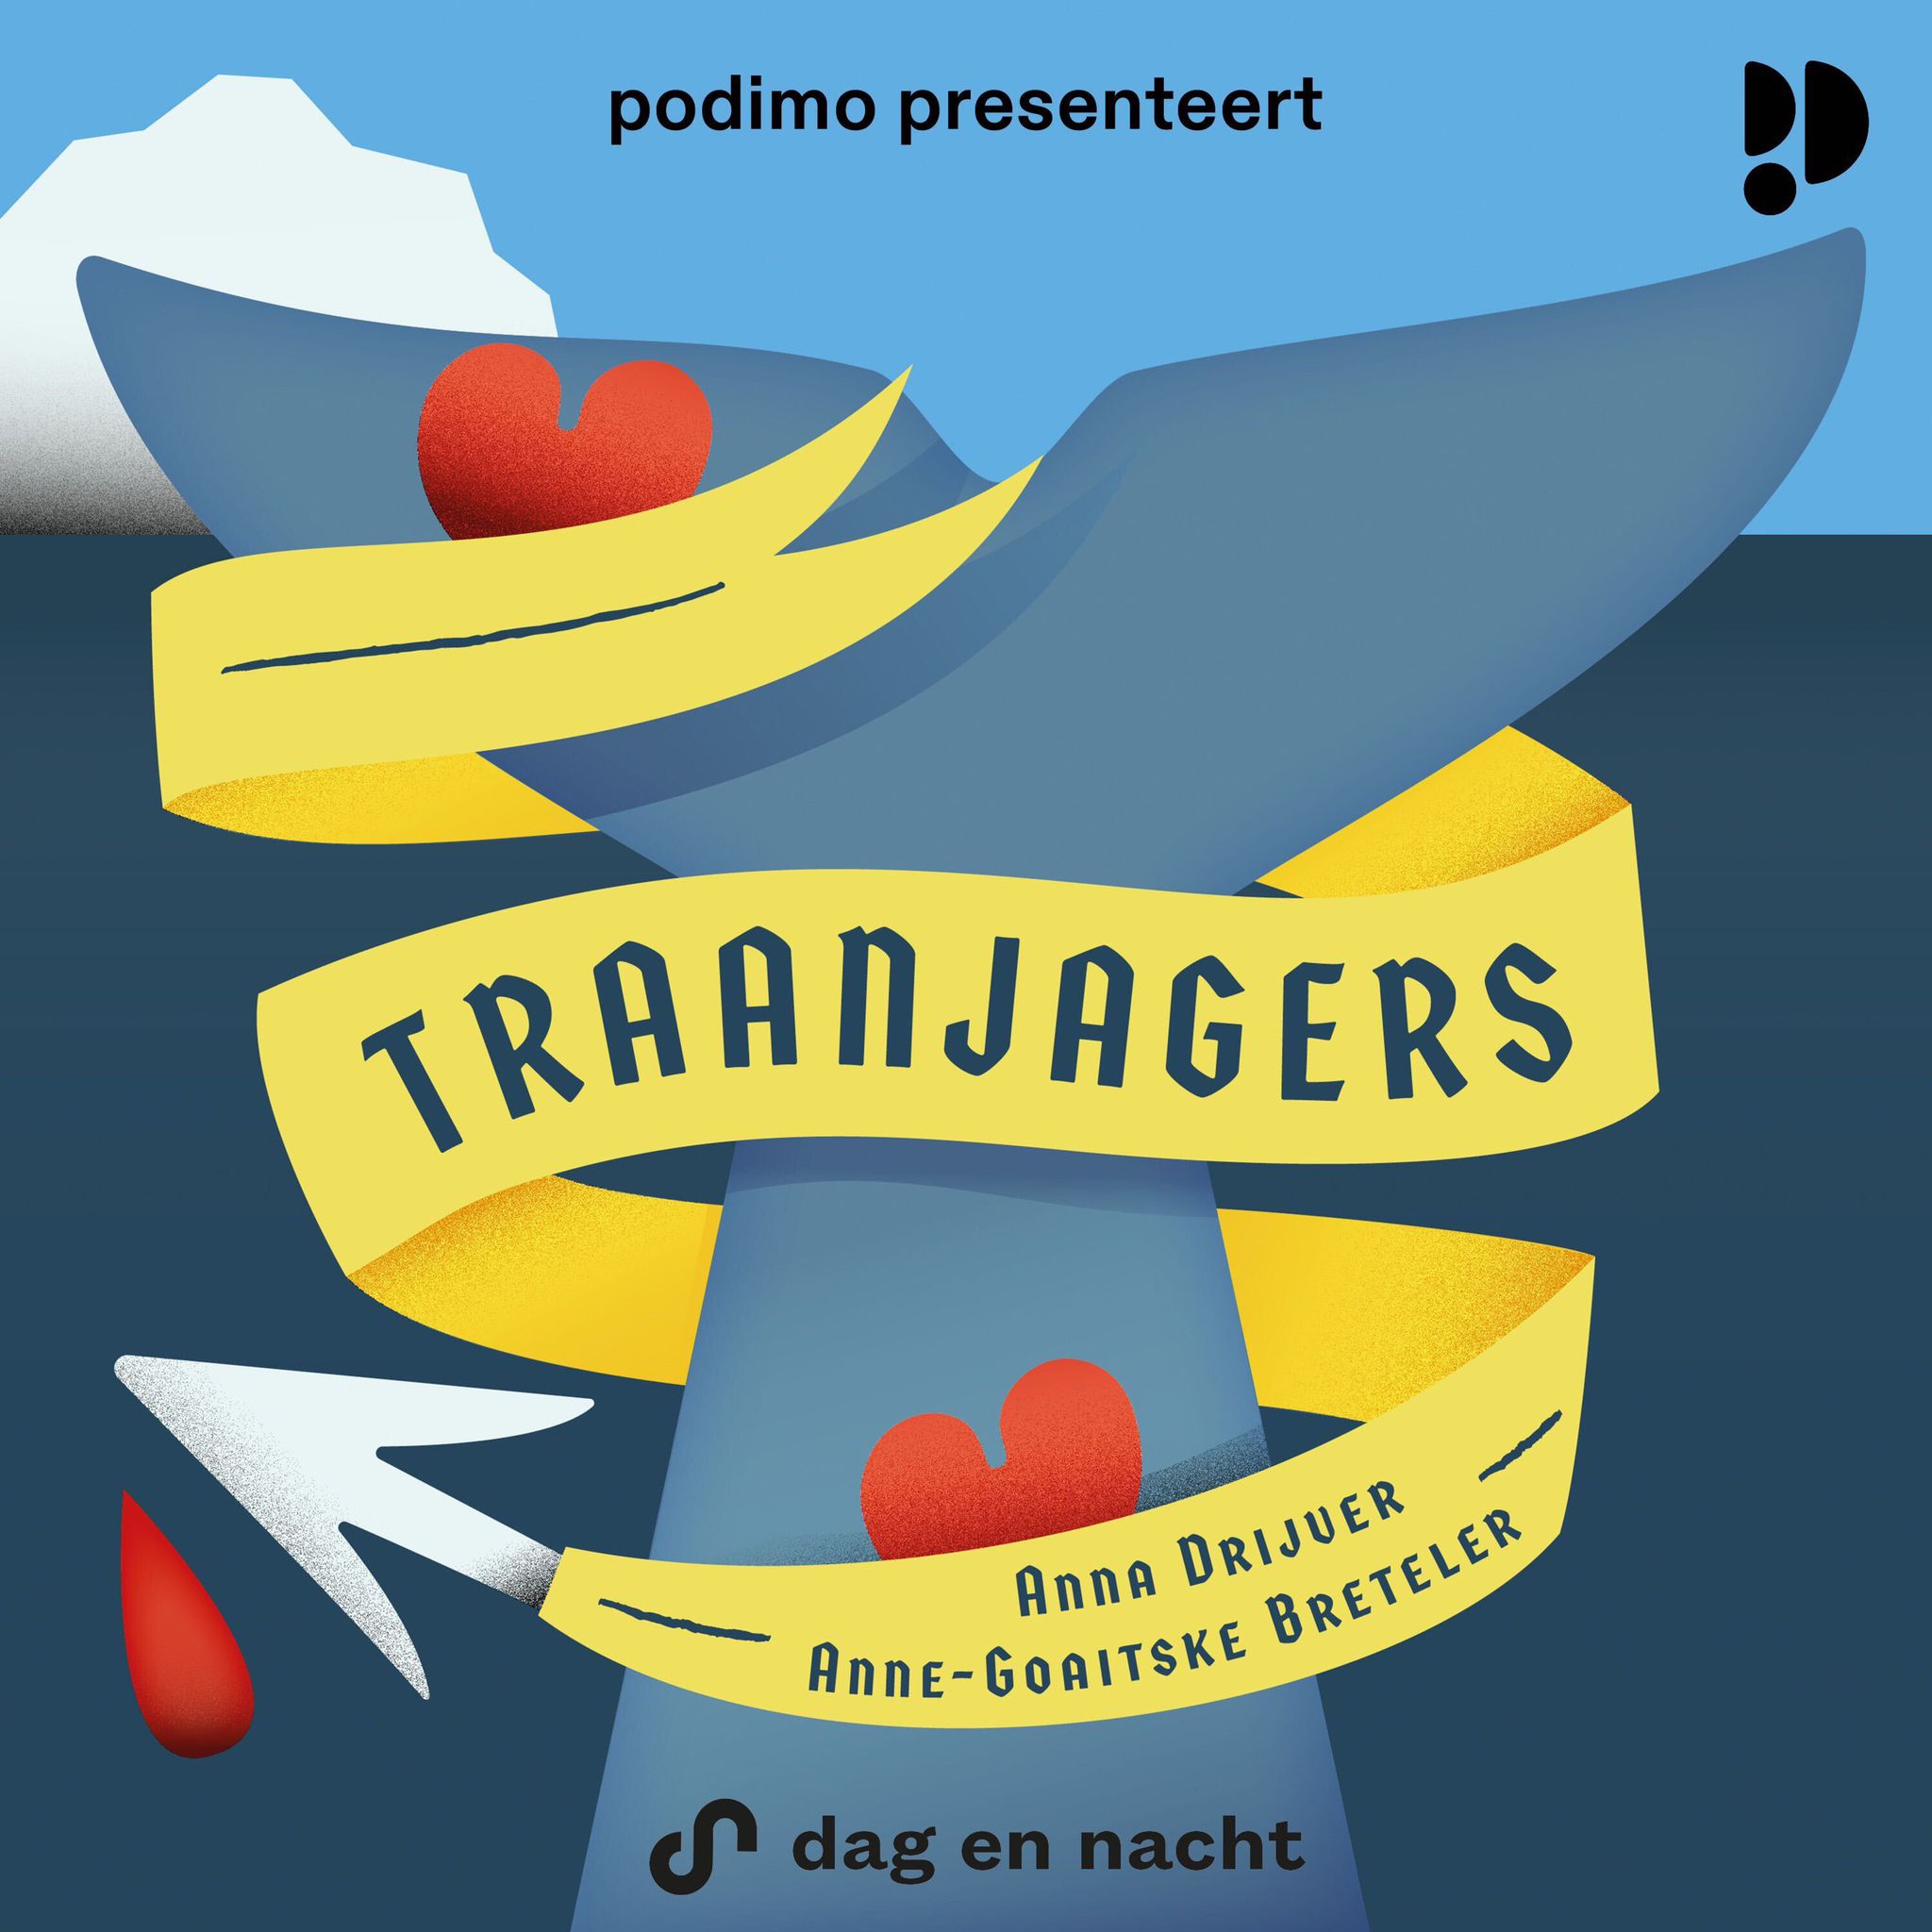 PODCAST-SERIE: Traanjagers